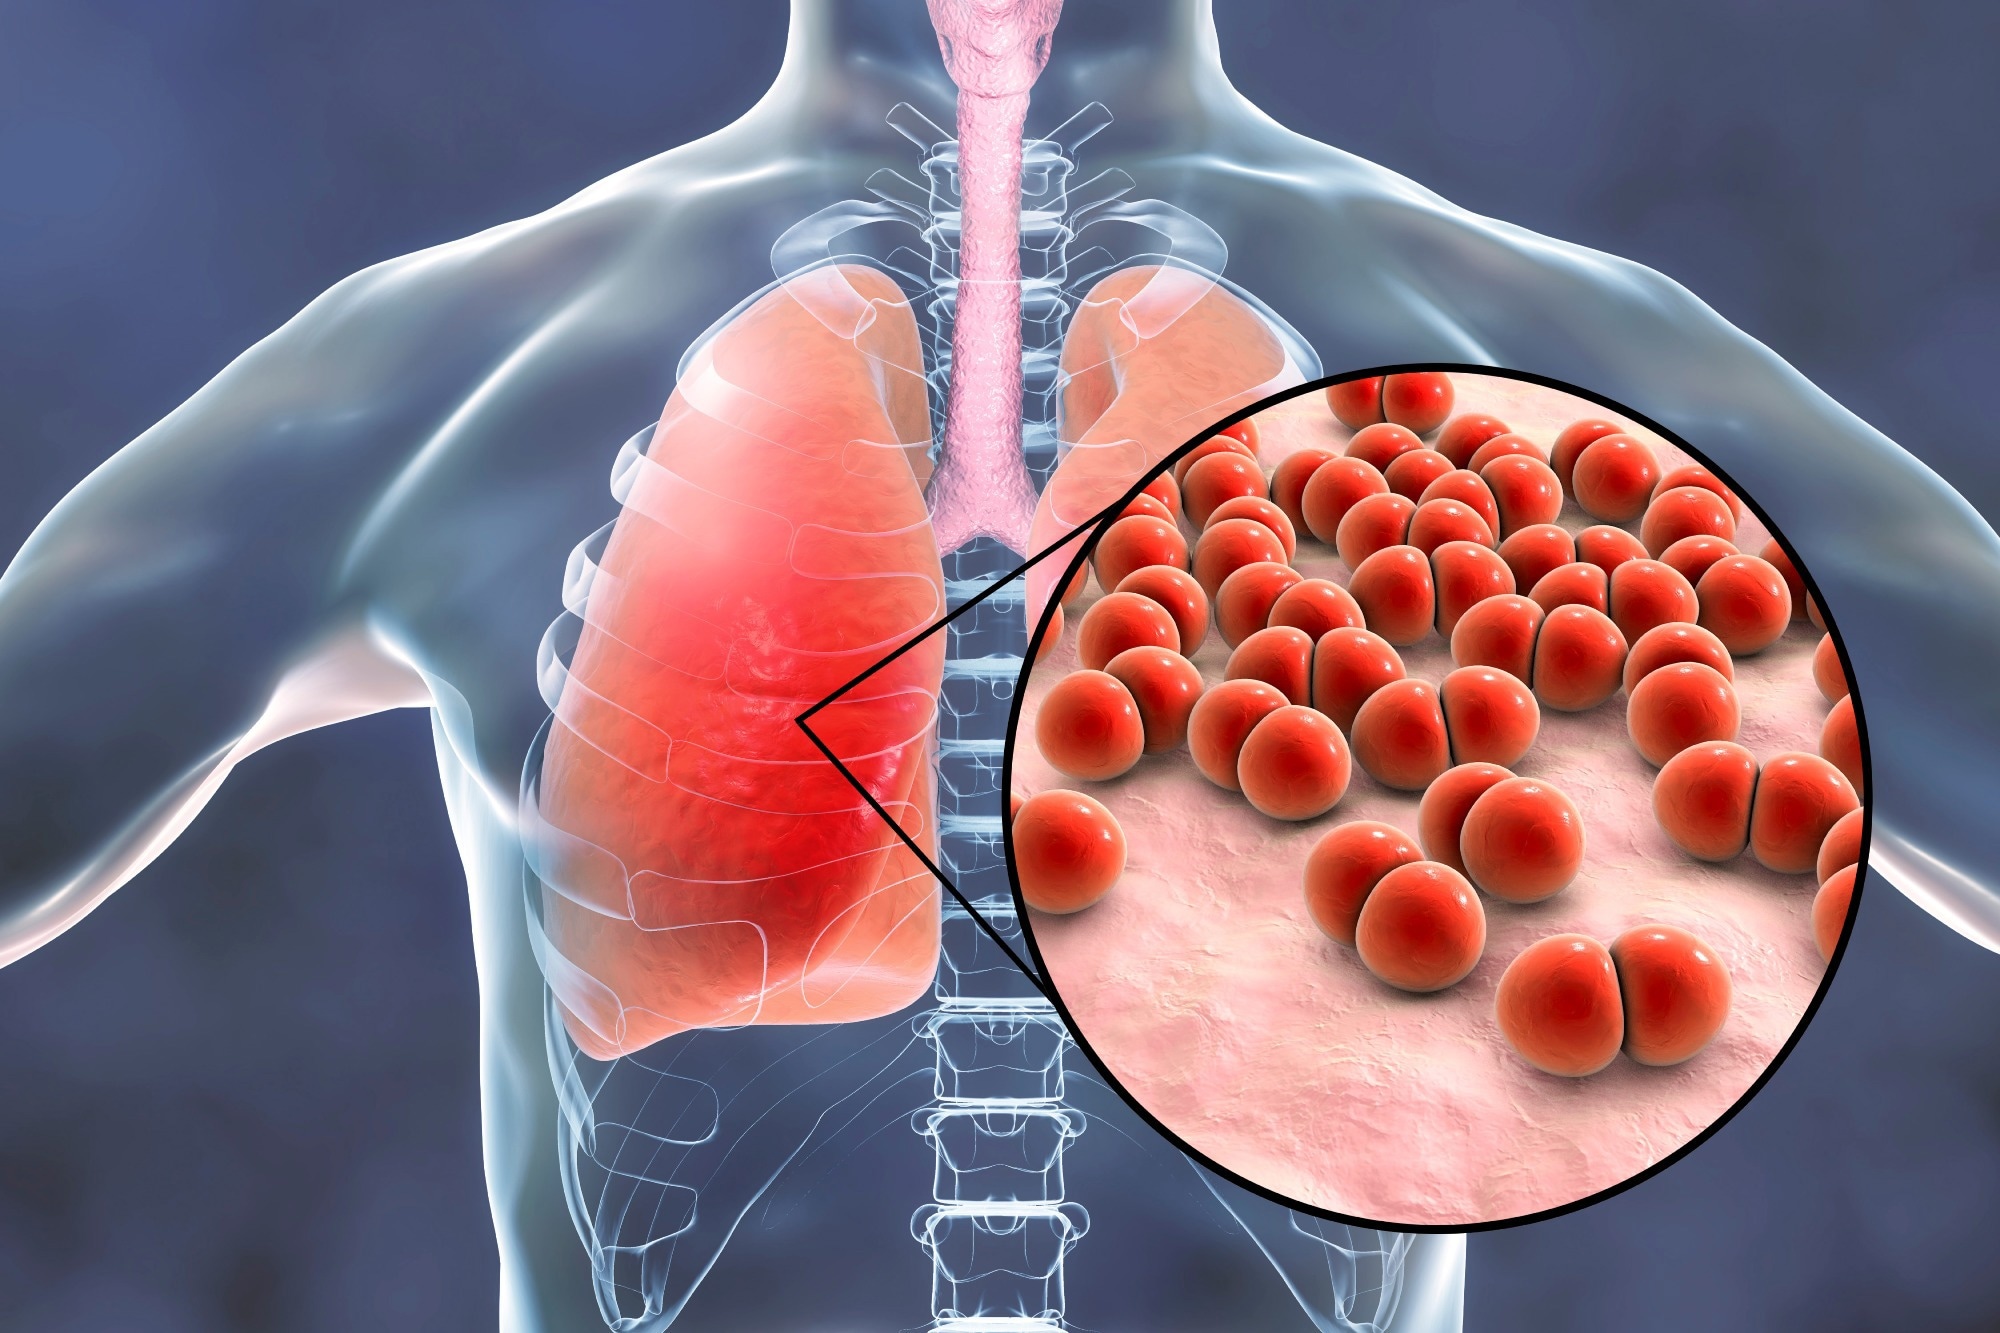 Study: Humans with inherited MyD88 and IRAK-4 deficiencies are predisposed to hypoxemic COVID-19 pneumonia. Image Credit: Kateryna Kon/Shutterstock